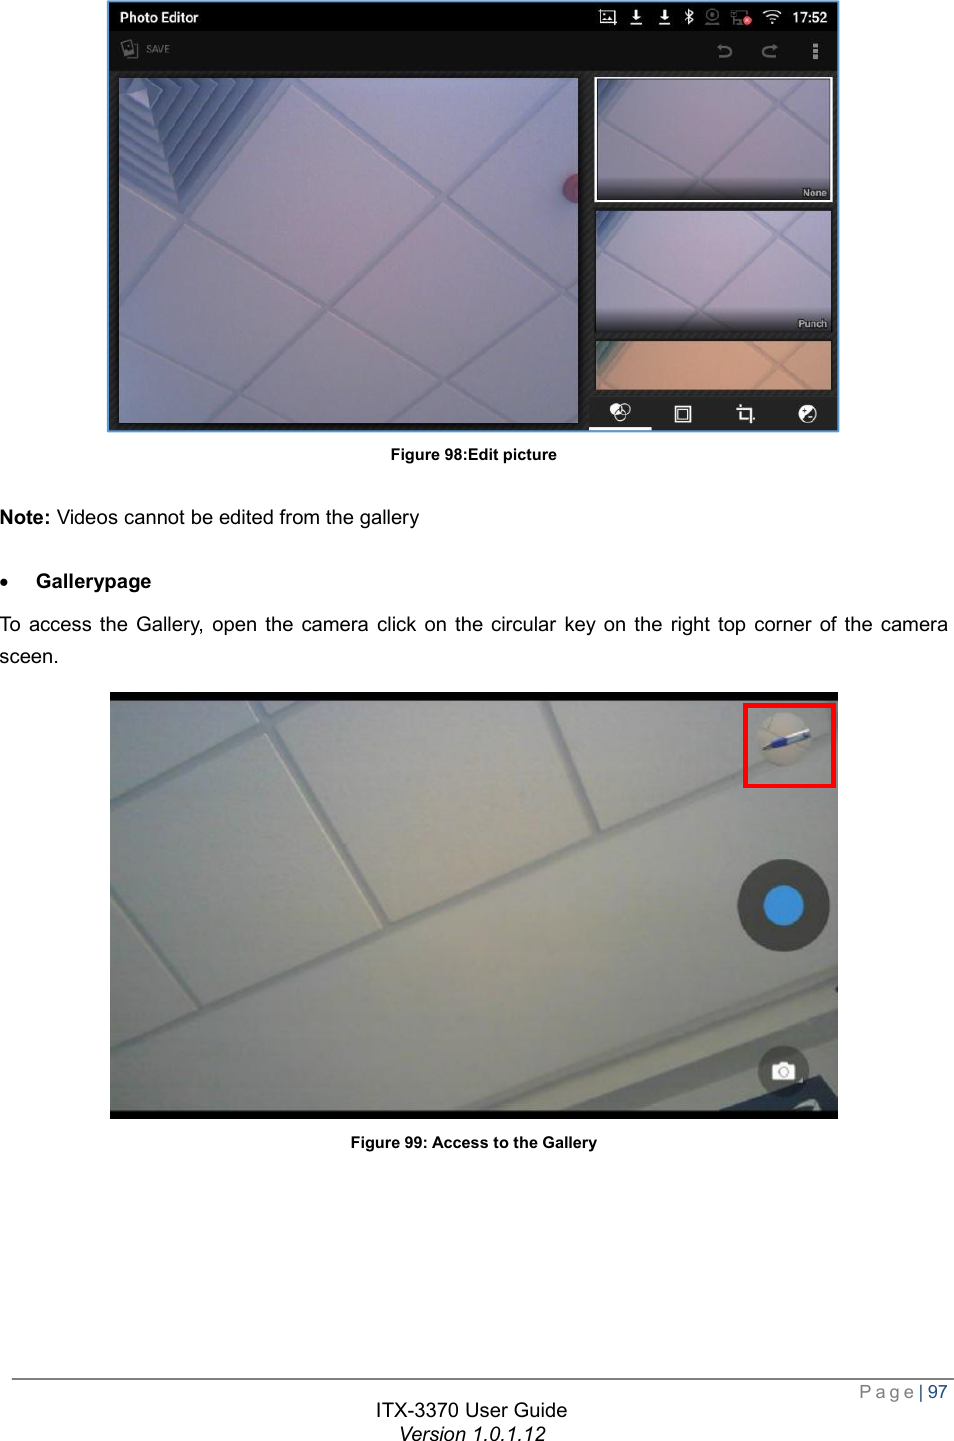  Page| 97  ITX-3370 User Guide Version 1.0.1.12   Figure 98:Edit picture  Note: Videos cannot be edited from the gallery  · Gallerypage To access the Gallery, open the camera click on the circular key on the right top corner of the camera sceen.  Figure 99: Access to the Gallery 